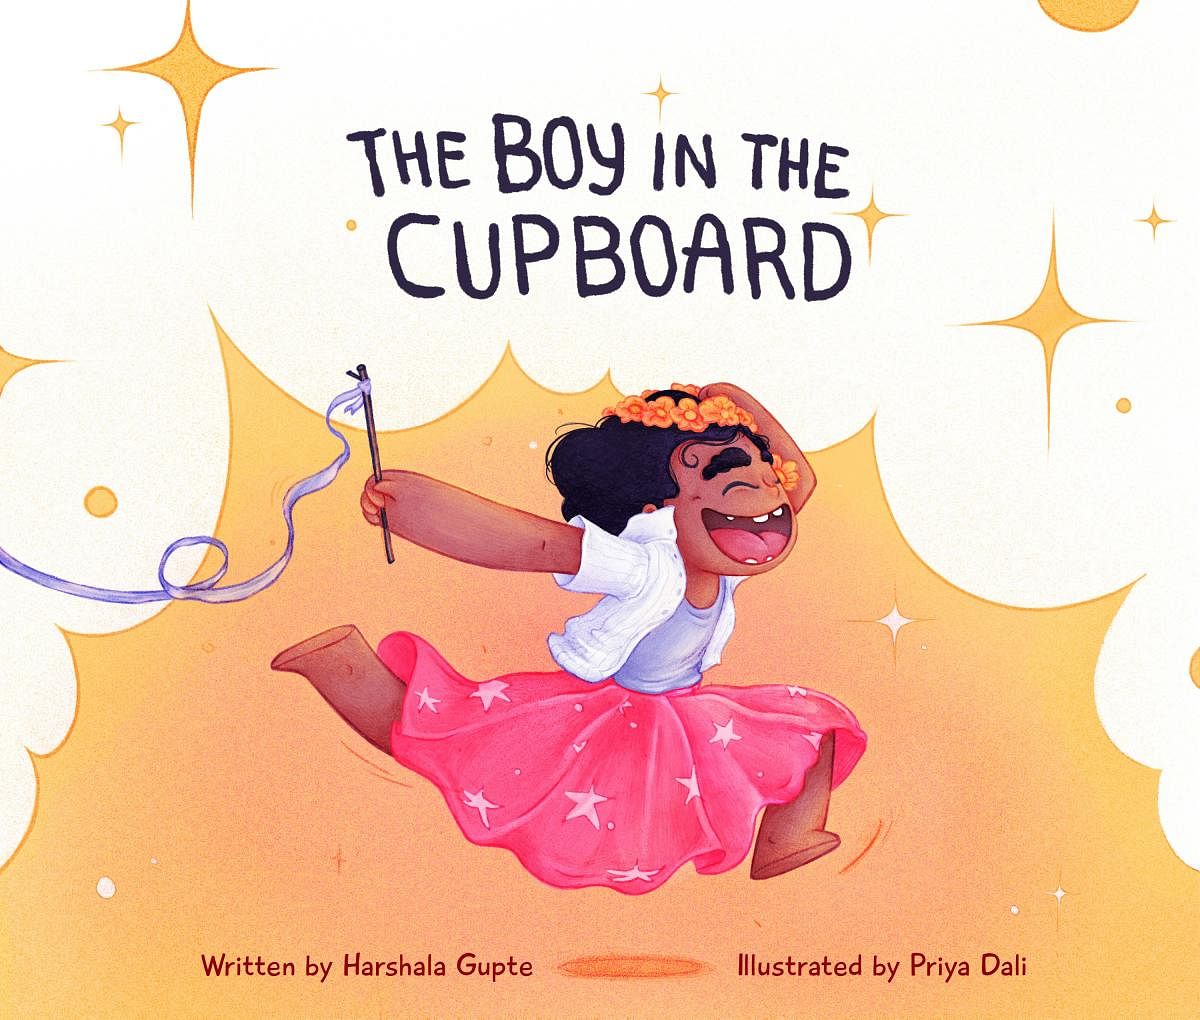 Queer themes in Indian books for children